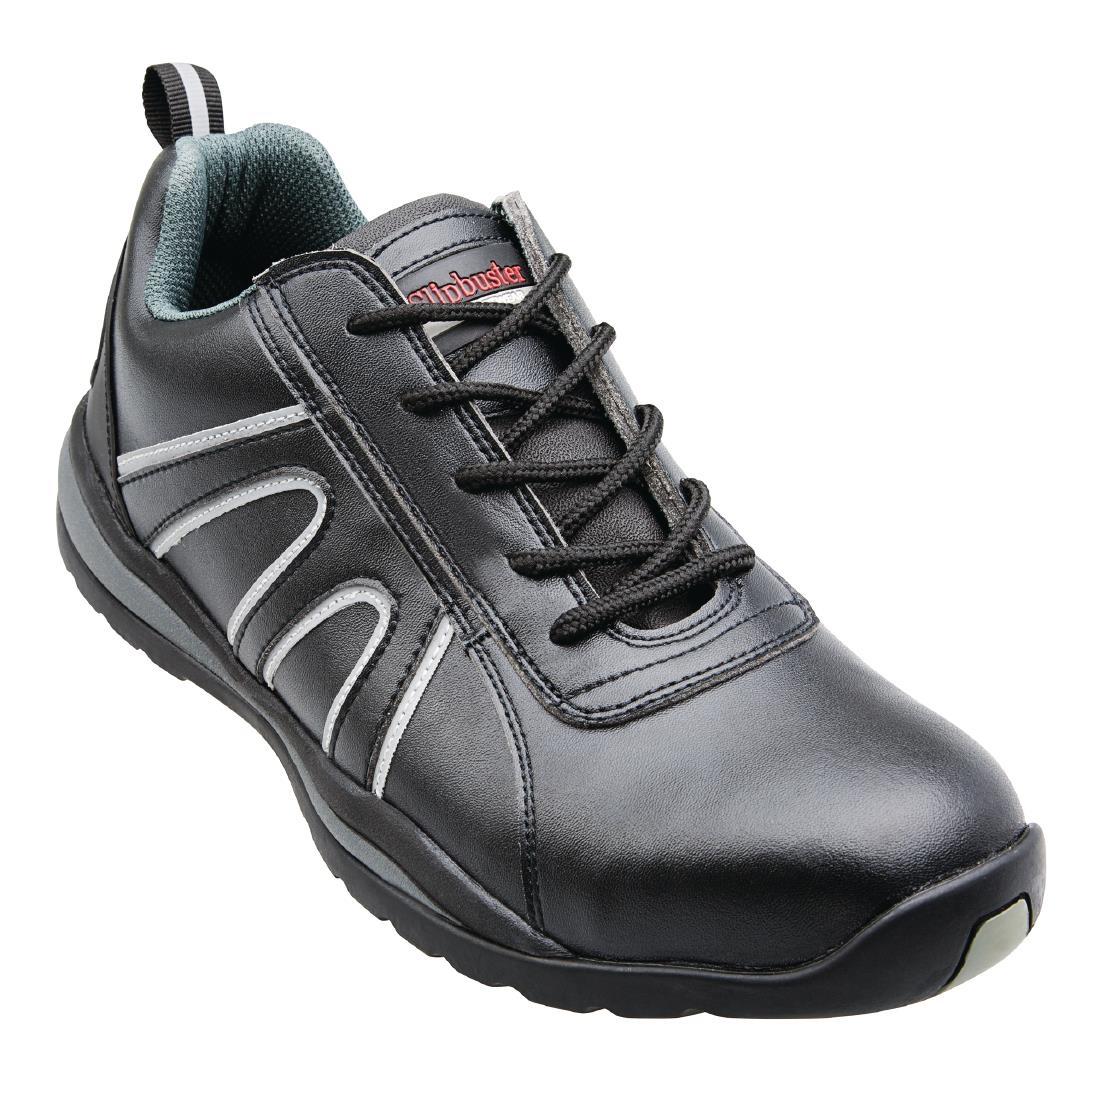 Slipbuster Safety Trainers Black 41 - A708-41  - 6